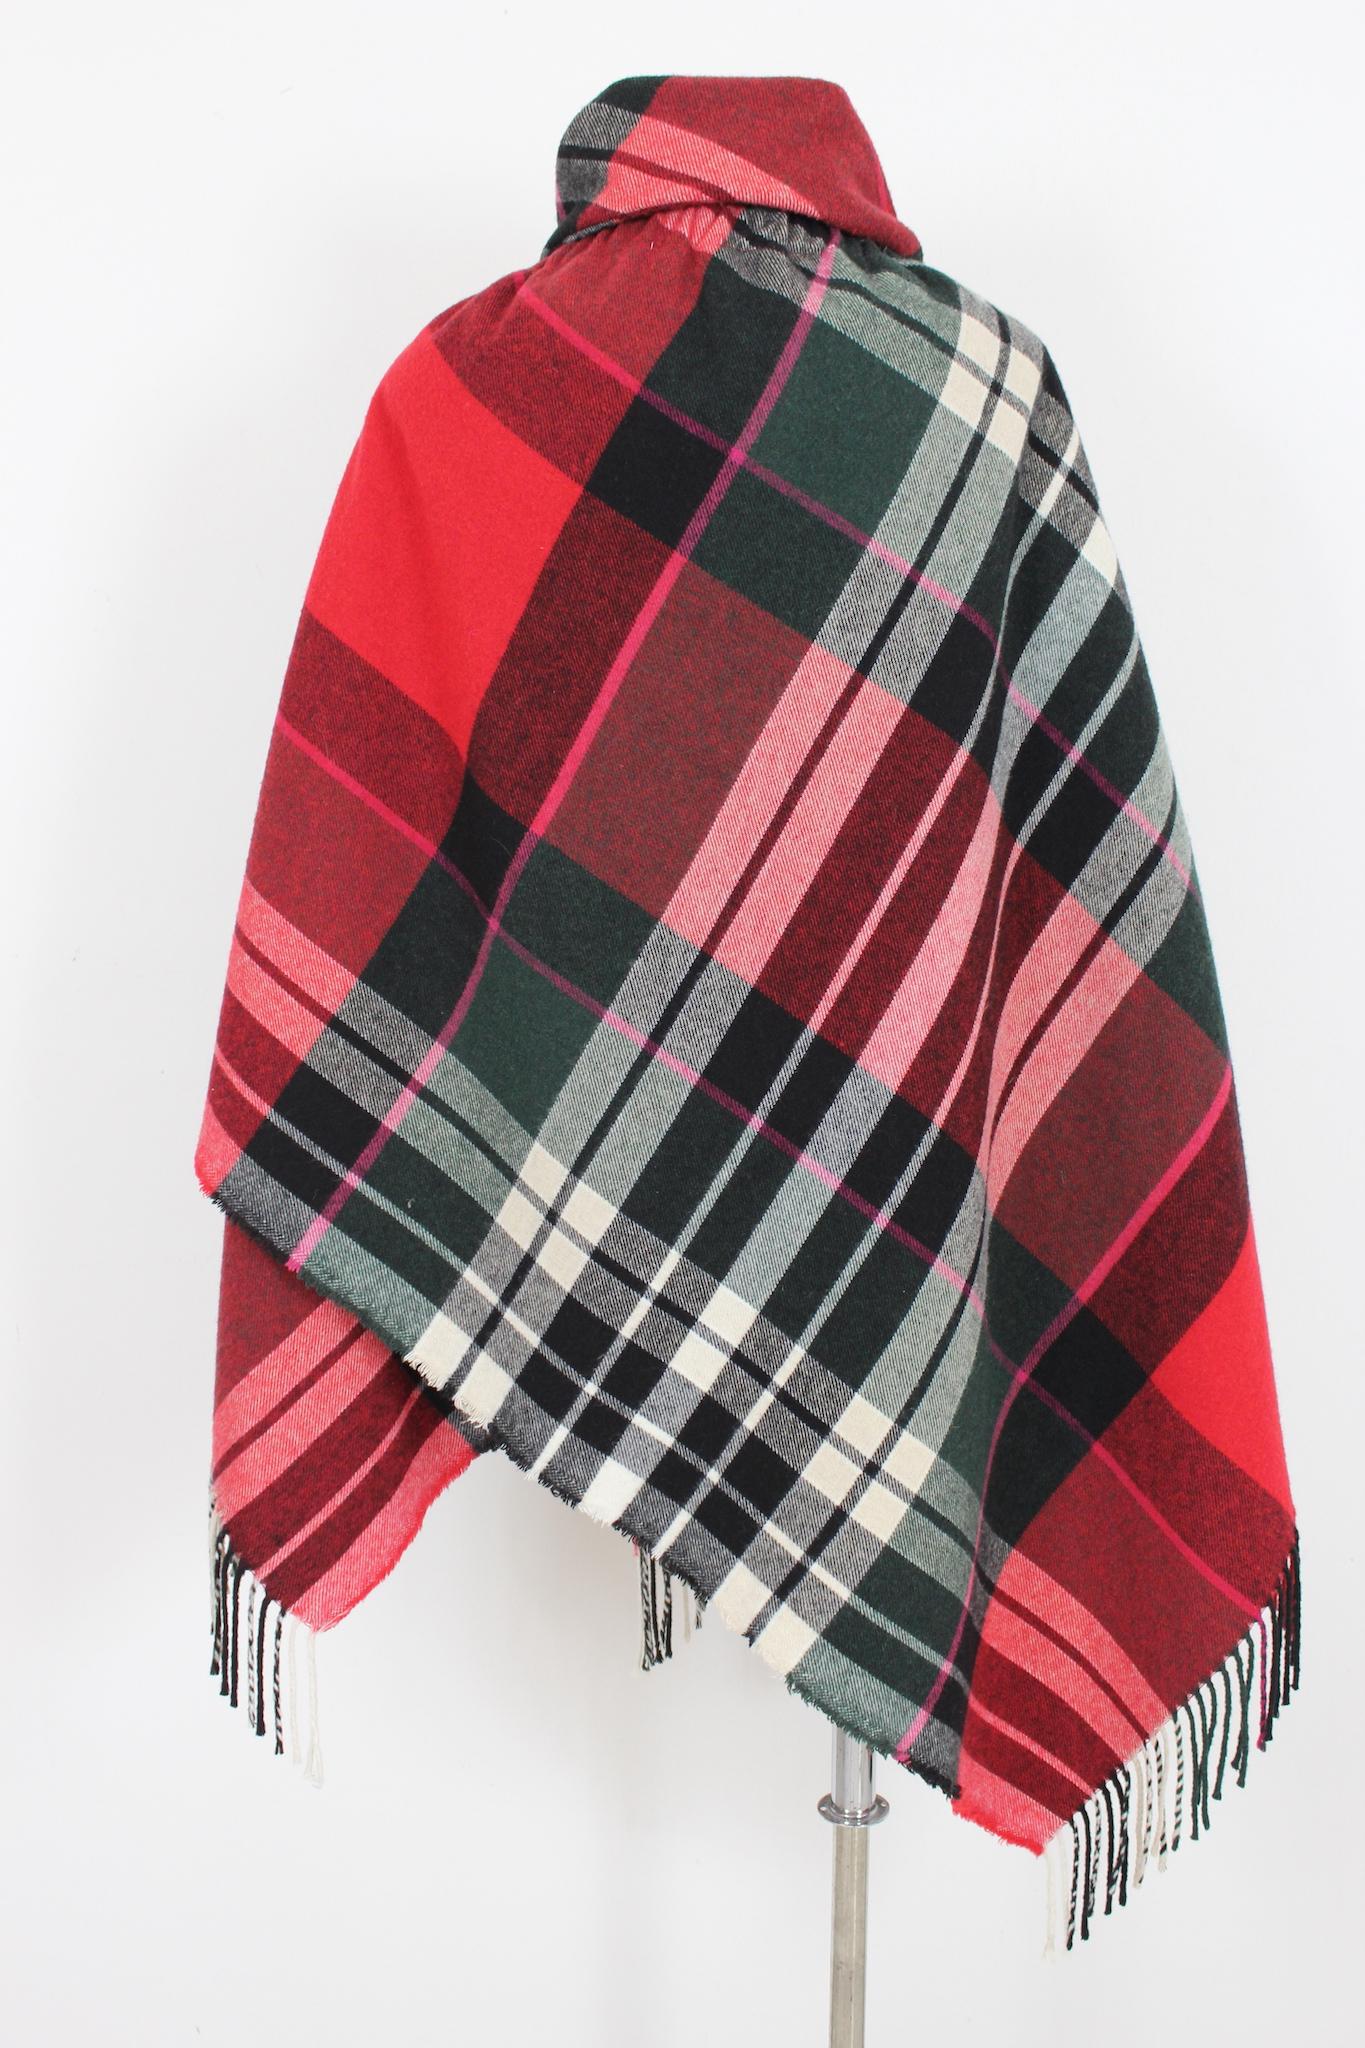 Wrap-around cape, red, green and black with tartan pattern by the designer Vivienne Westwood, 2000s. Soft shawl collar, closure with safety pin and fringes in the final part. Fabric in wool and other fibers. Made in Italy

Measures: 160 x 160